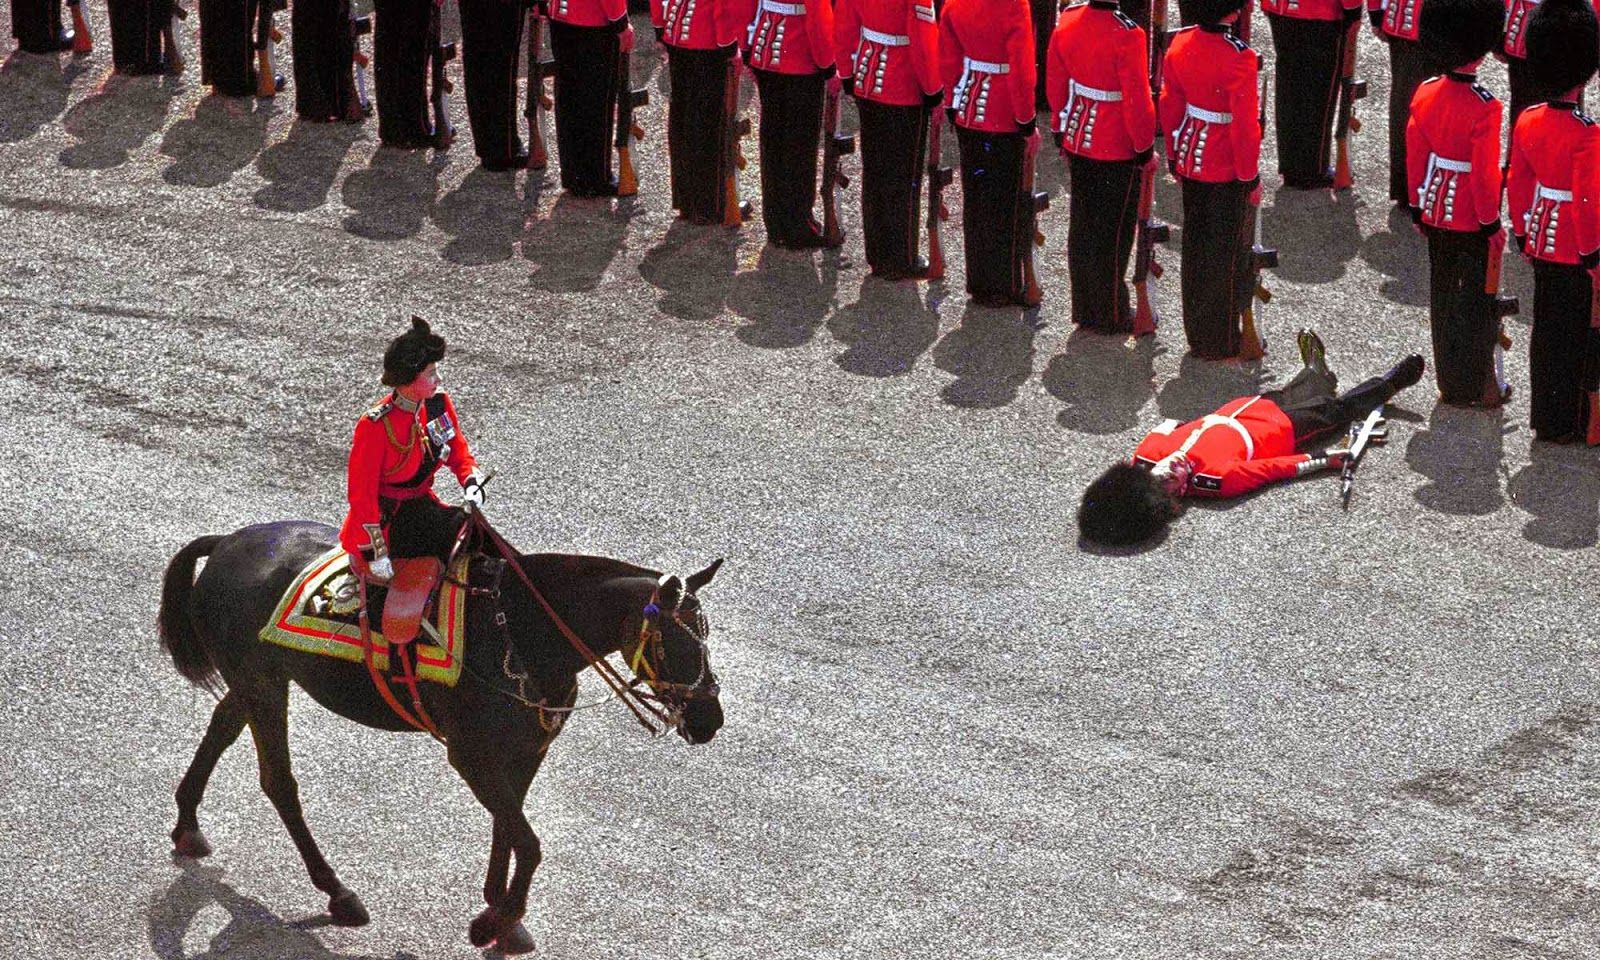 Queen Elizabeth II personally executes a soldier for "not standing precisely in line and being an unpleasant sight".